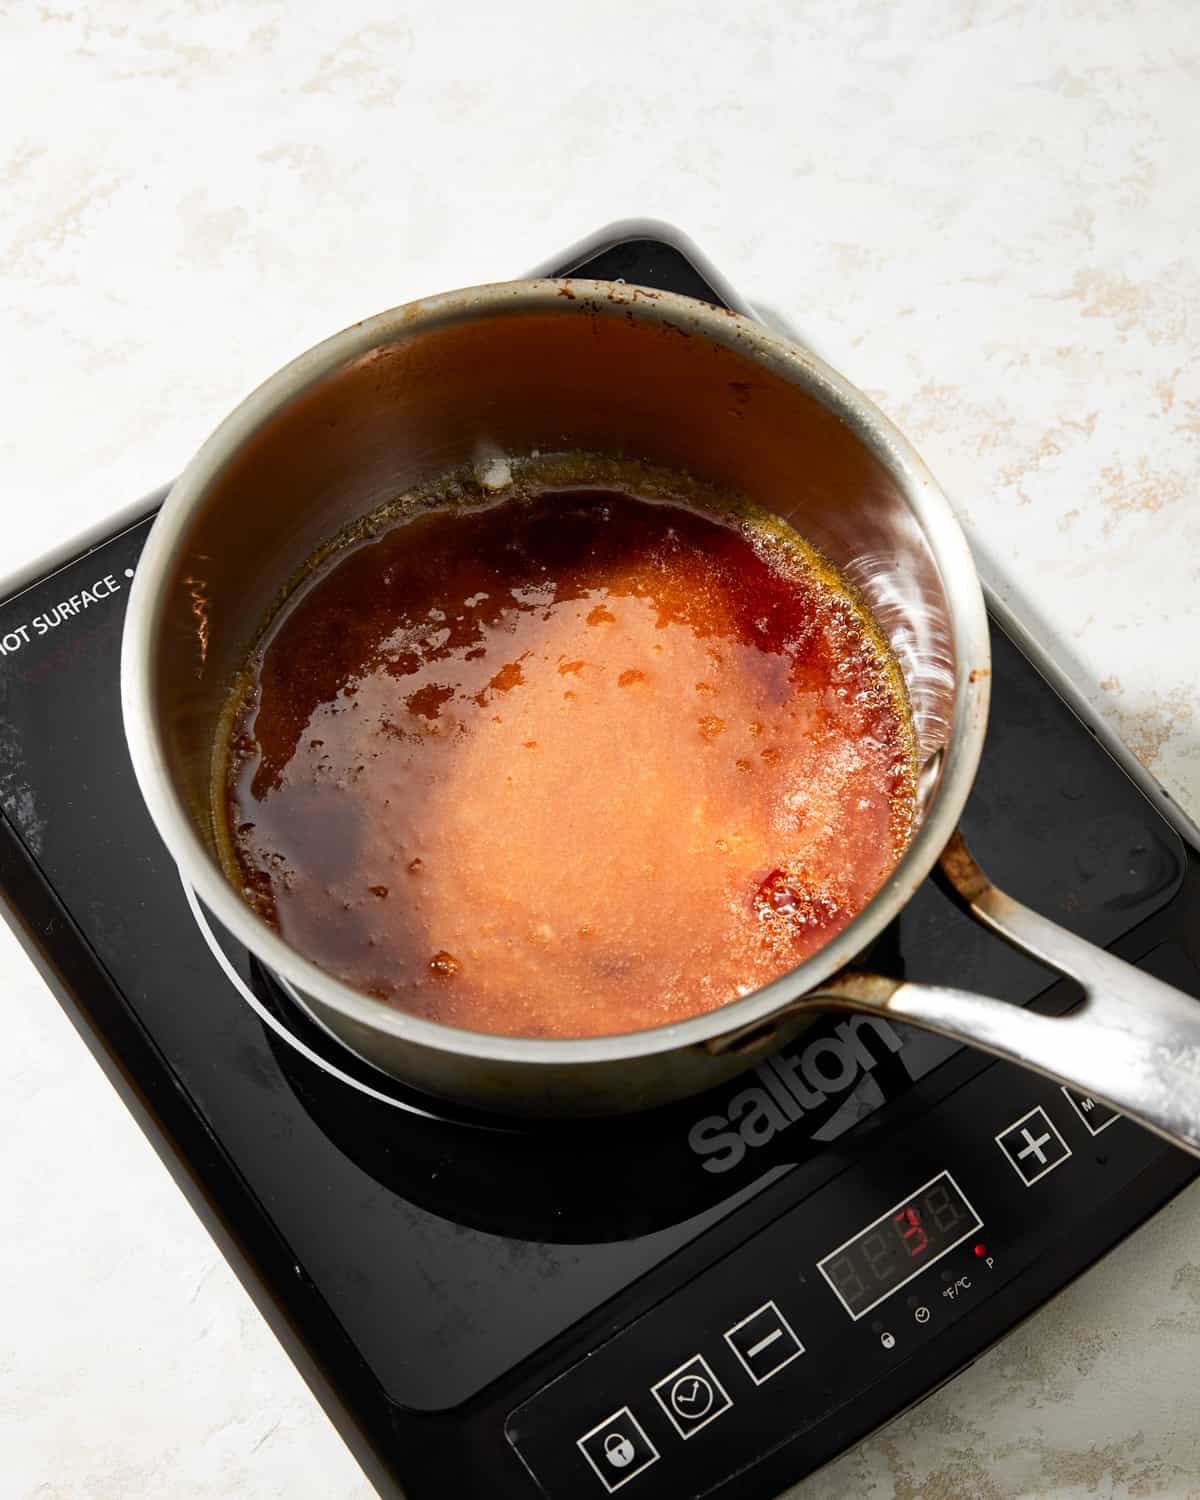 caramel in a saucepan on a hot plate.